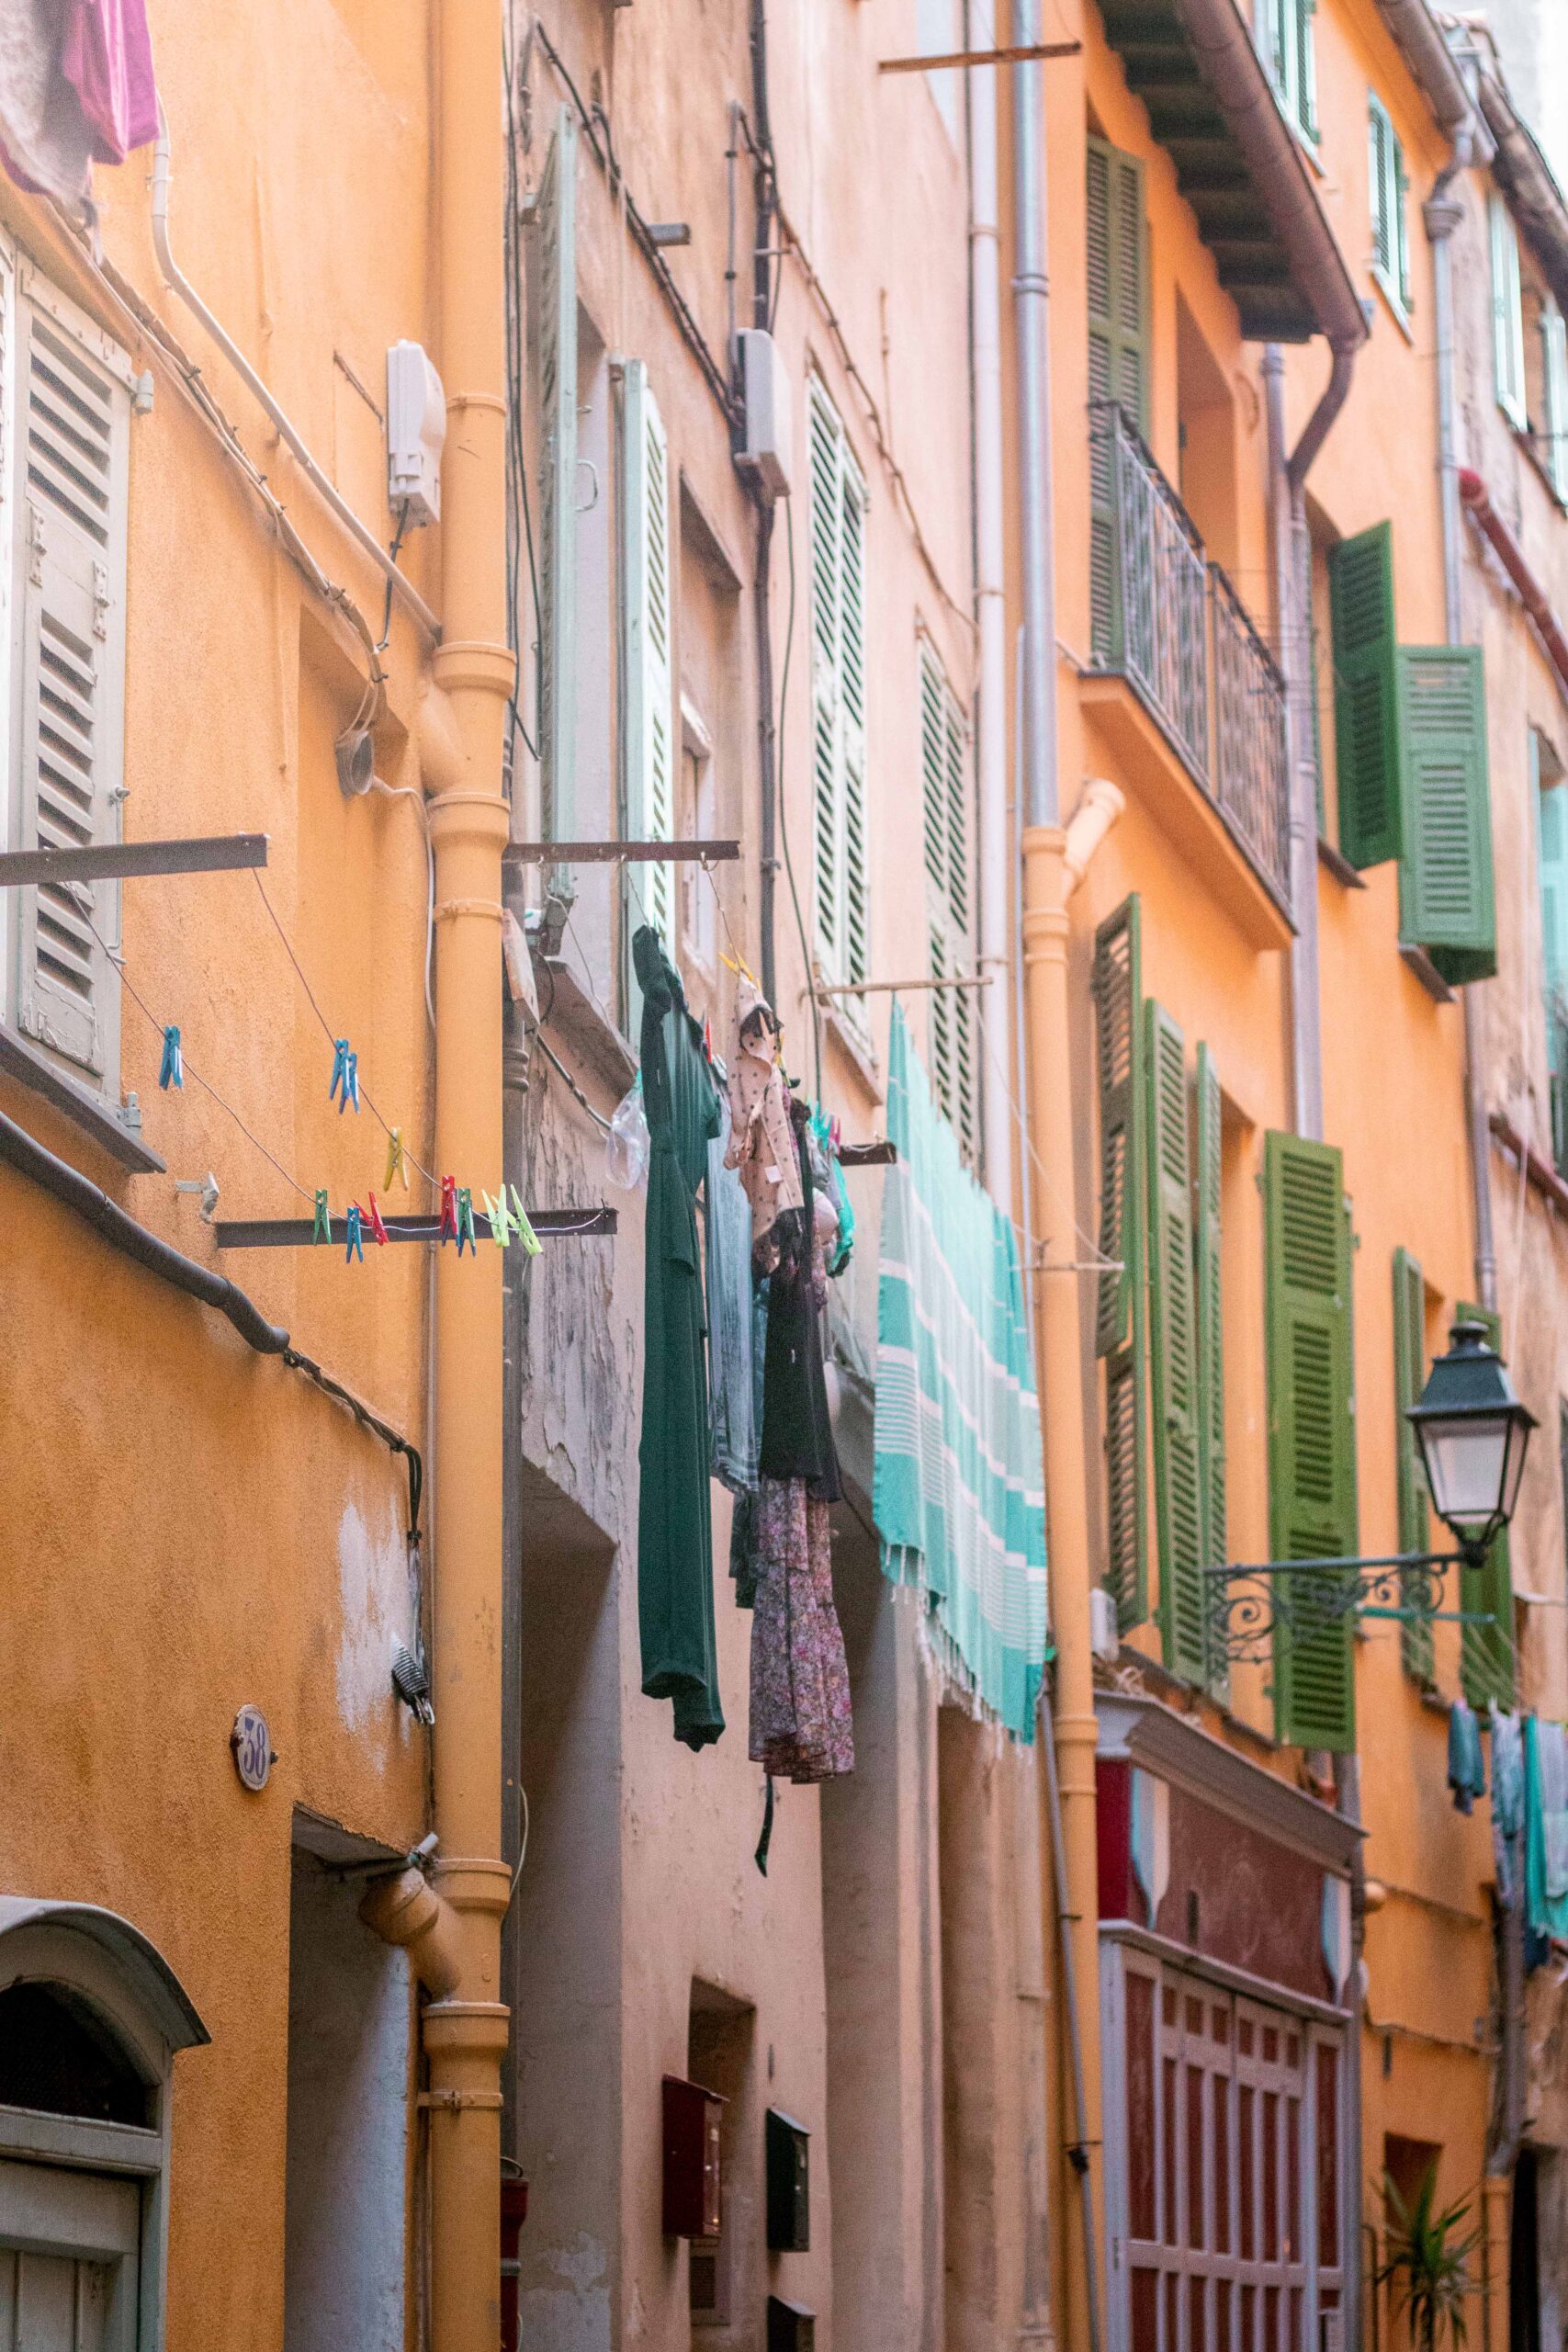 Hanging clothes drying on the balcony of colourful buildings with yellow and orange facades in the Old Town of Menton, France